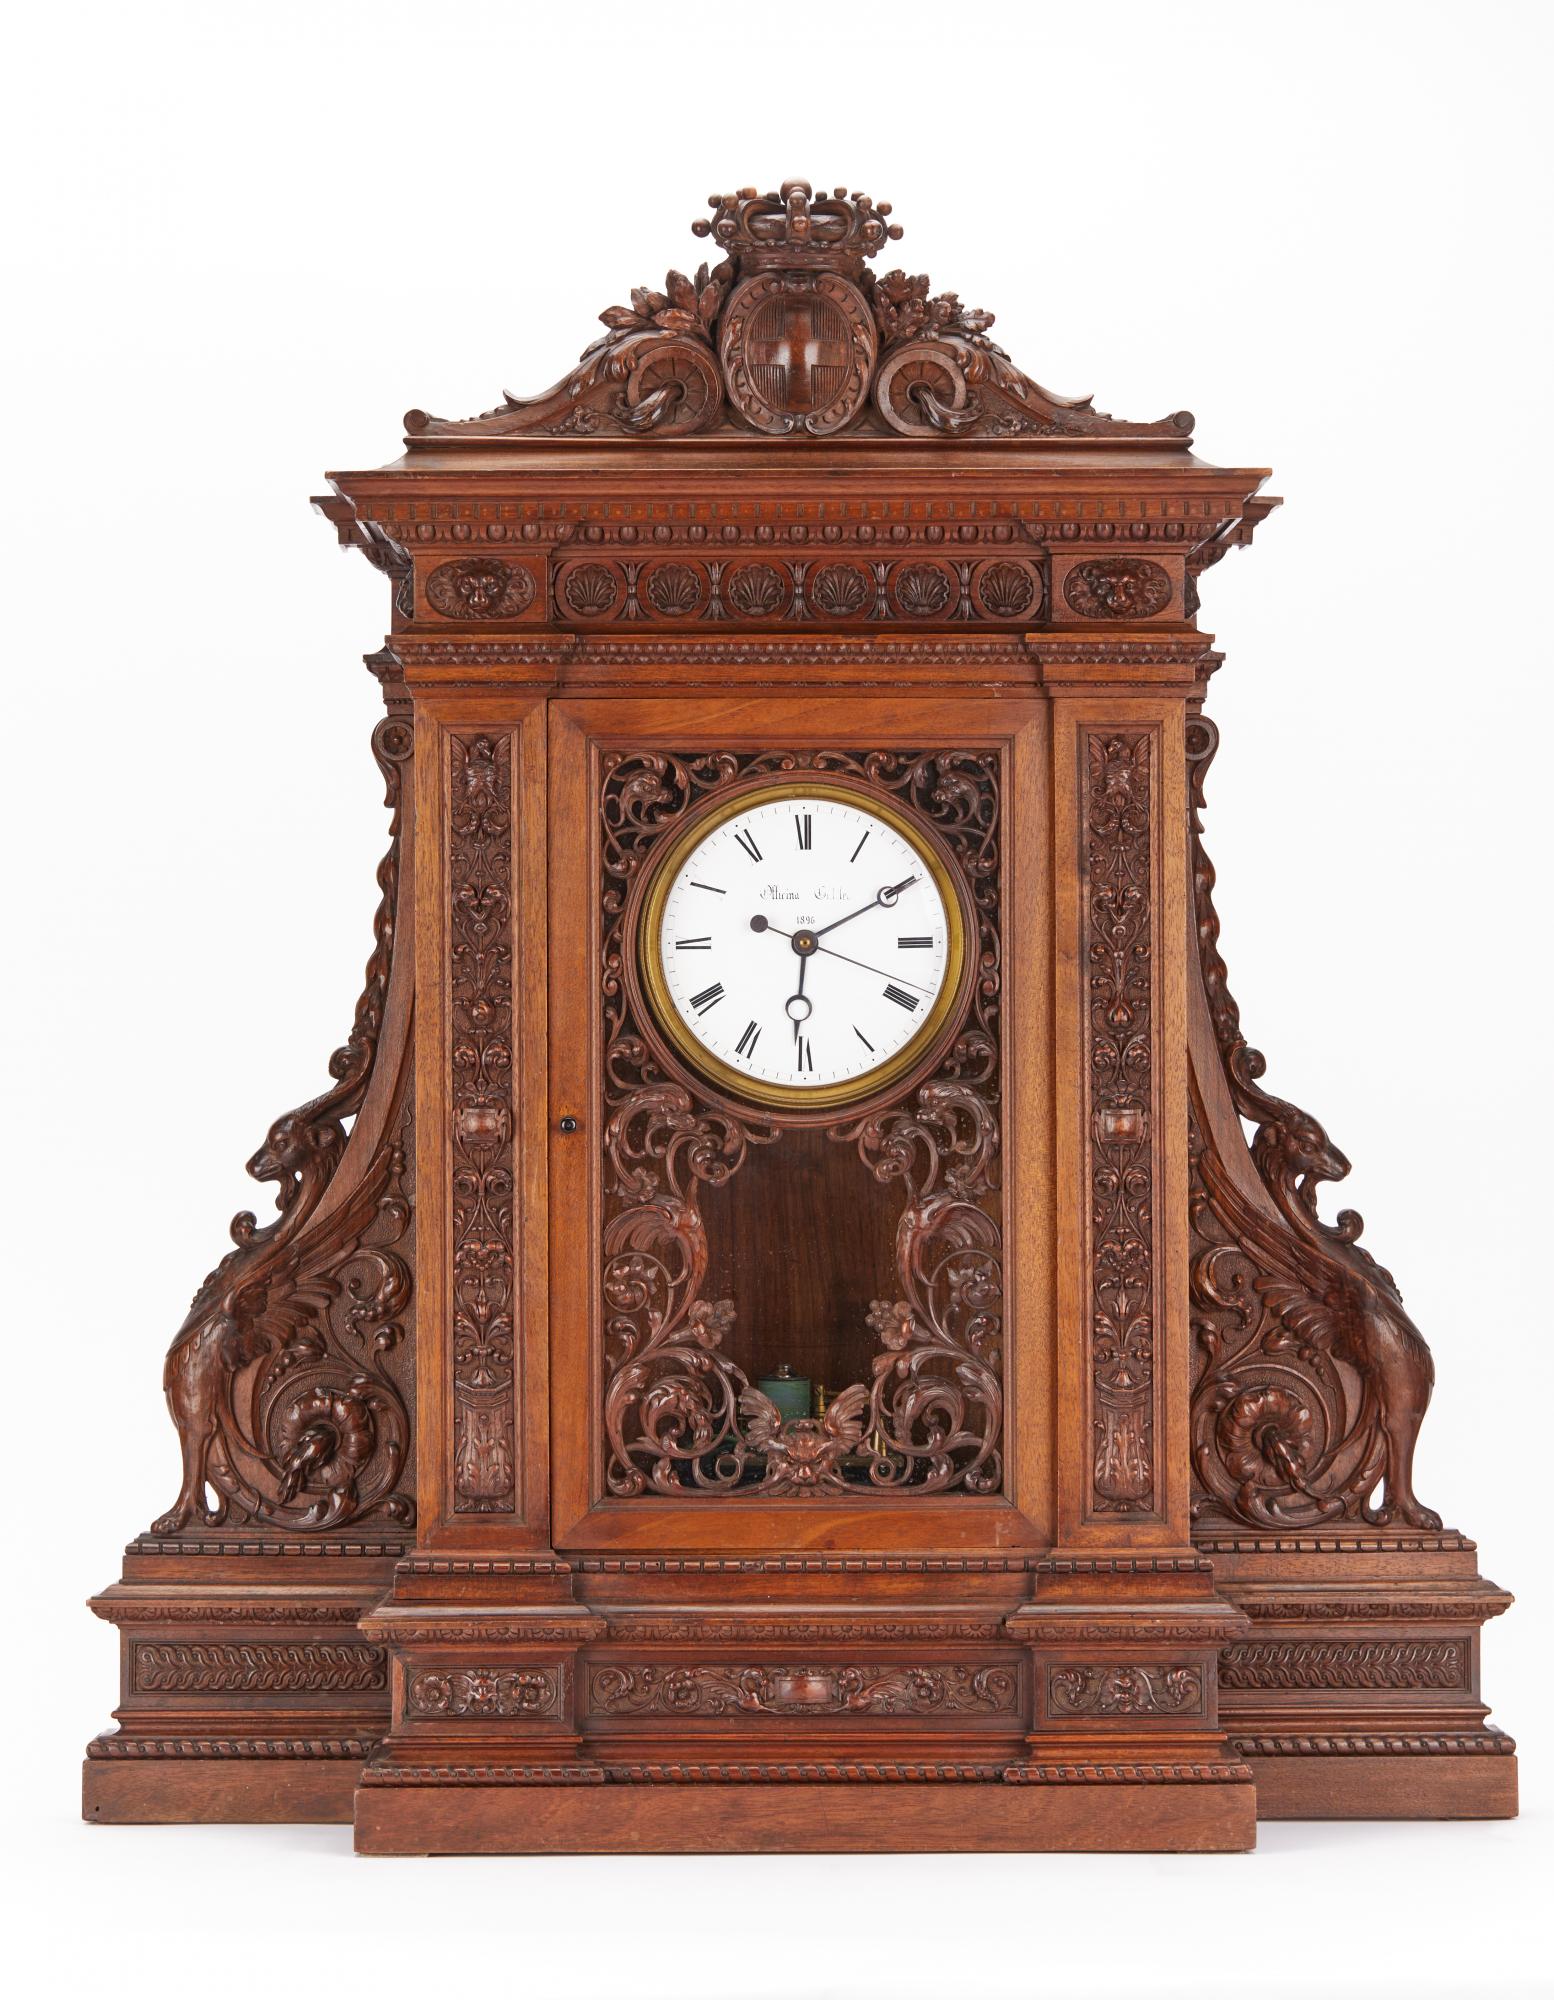 An exceptional rare and important early electric oak finely wood carved mantel clock from MATTHIAS HIPP.

The beautiful wood carved case with in the top the coats of arms from a noble family from the north of Italy . Mathias Hipp was one of the